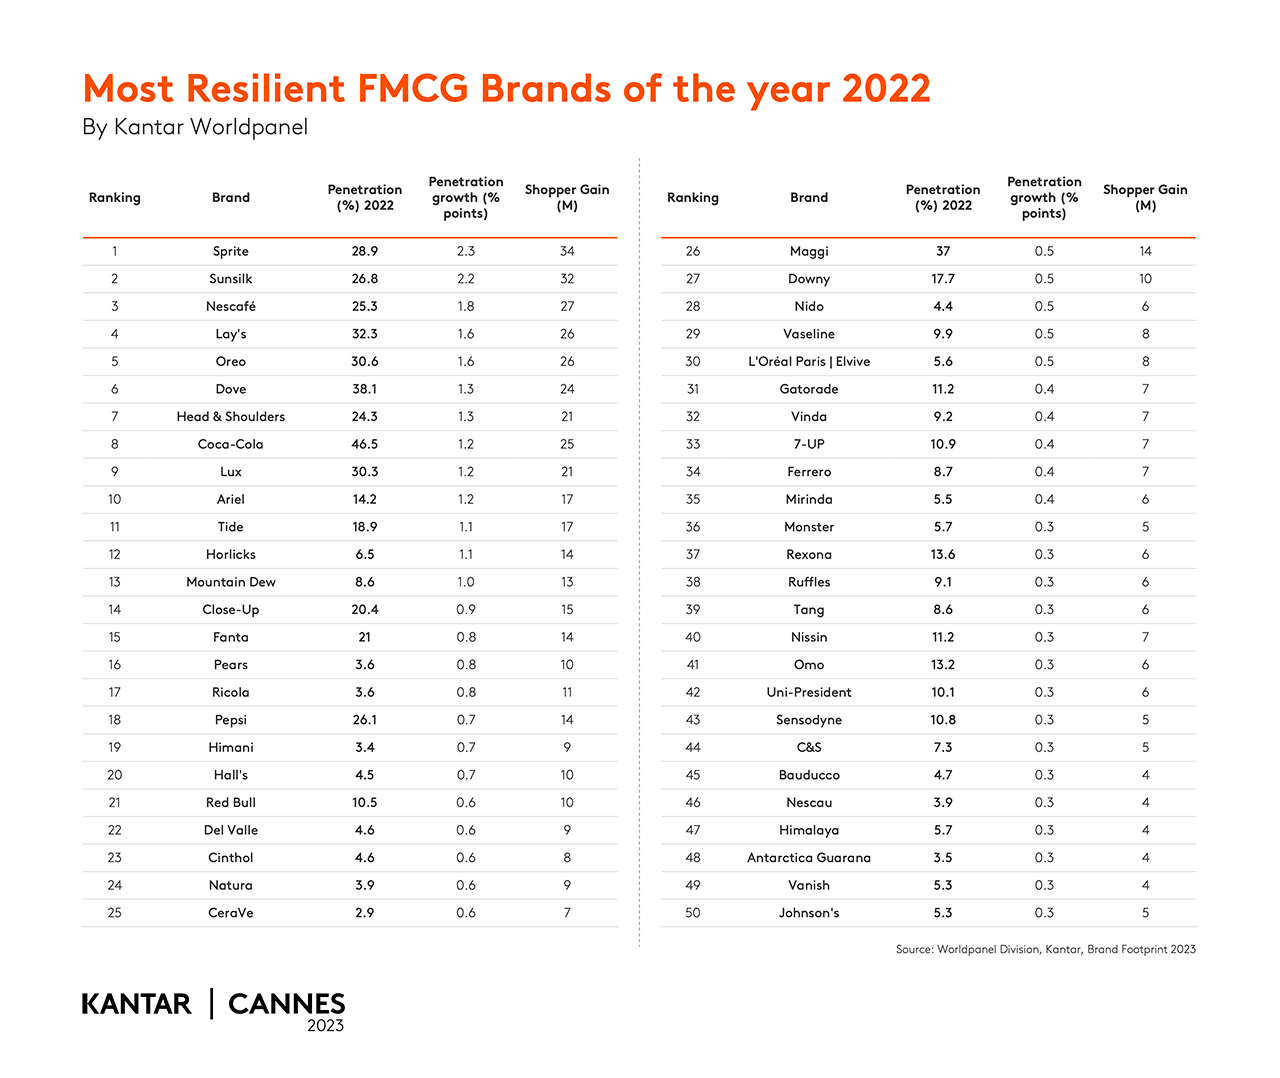 Ranking most resilient FMCG brands